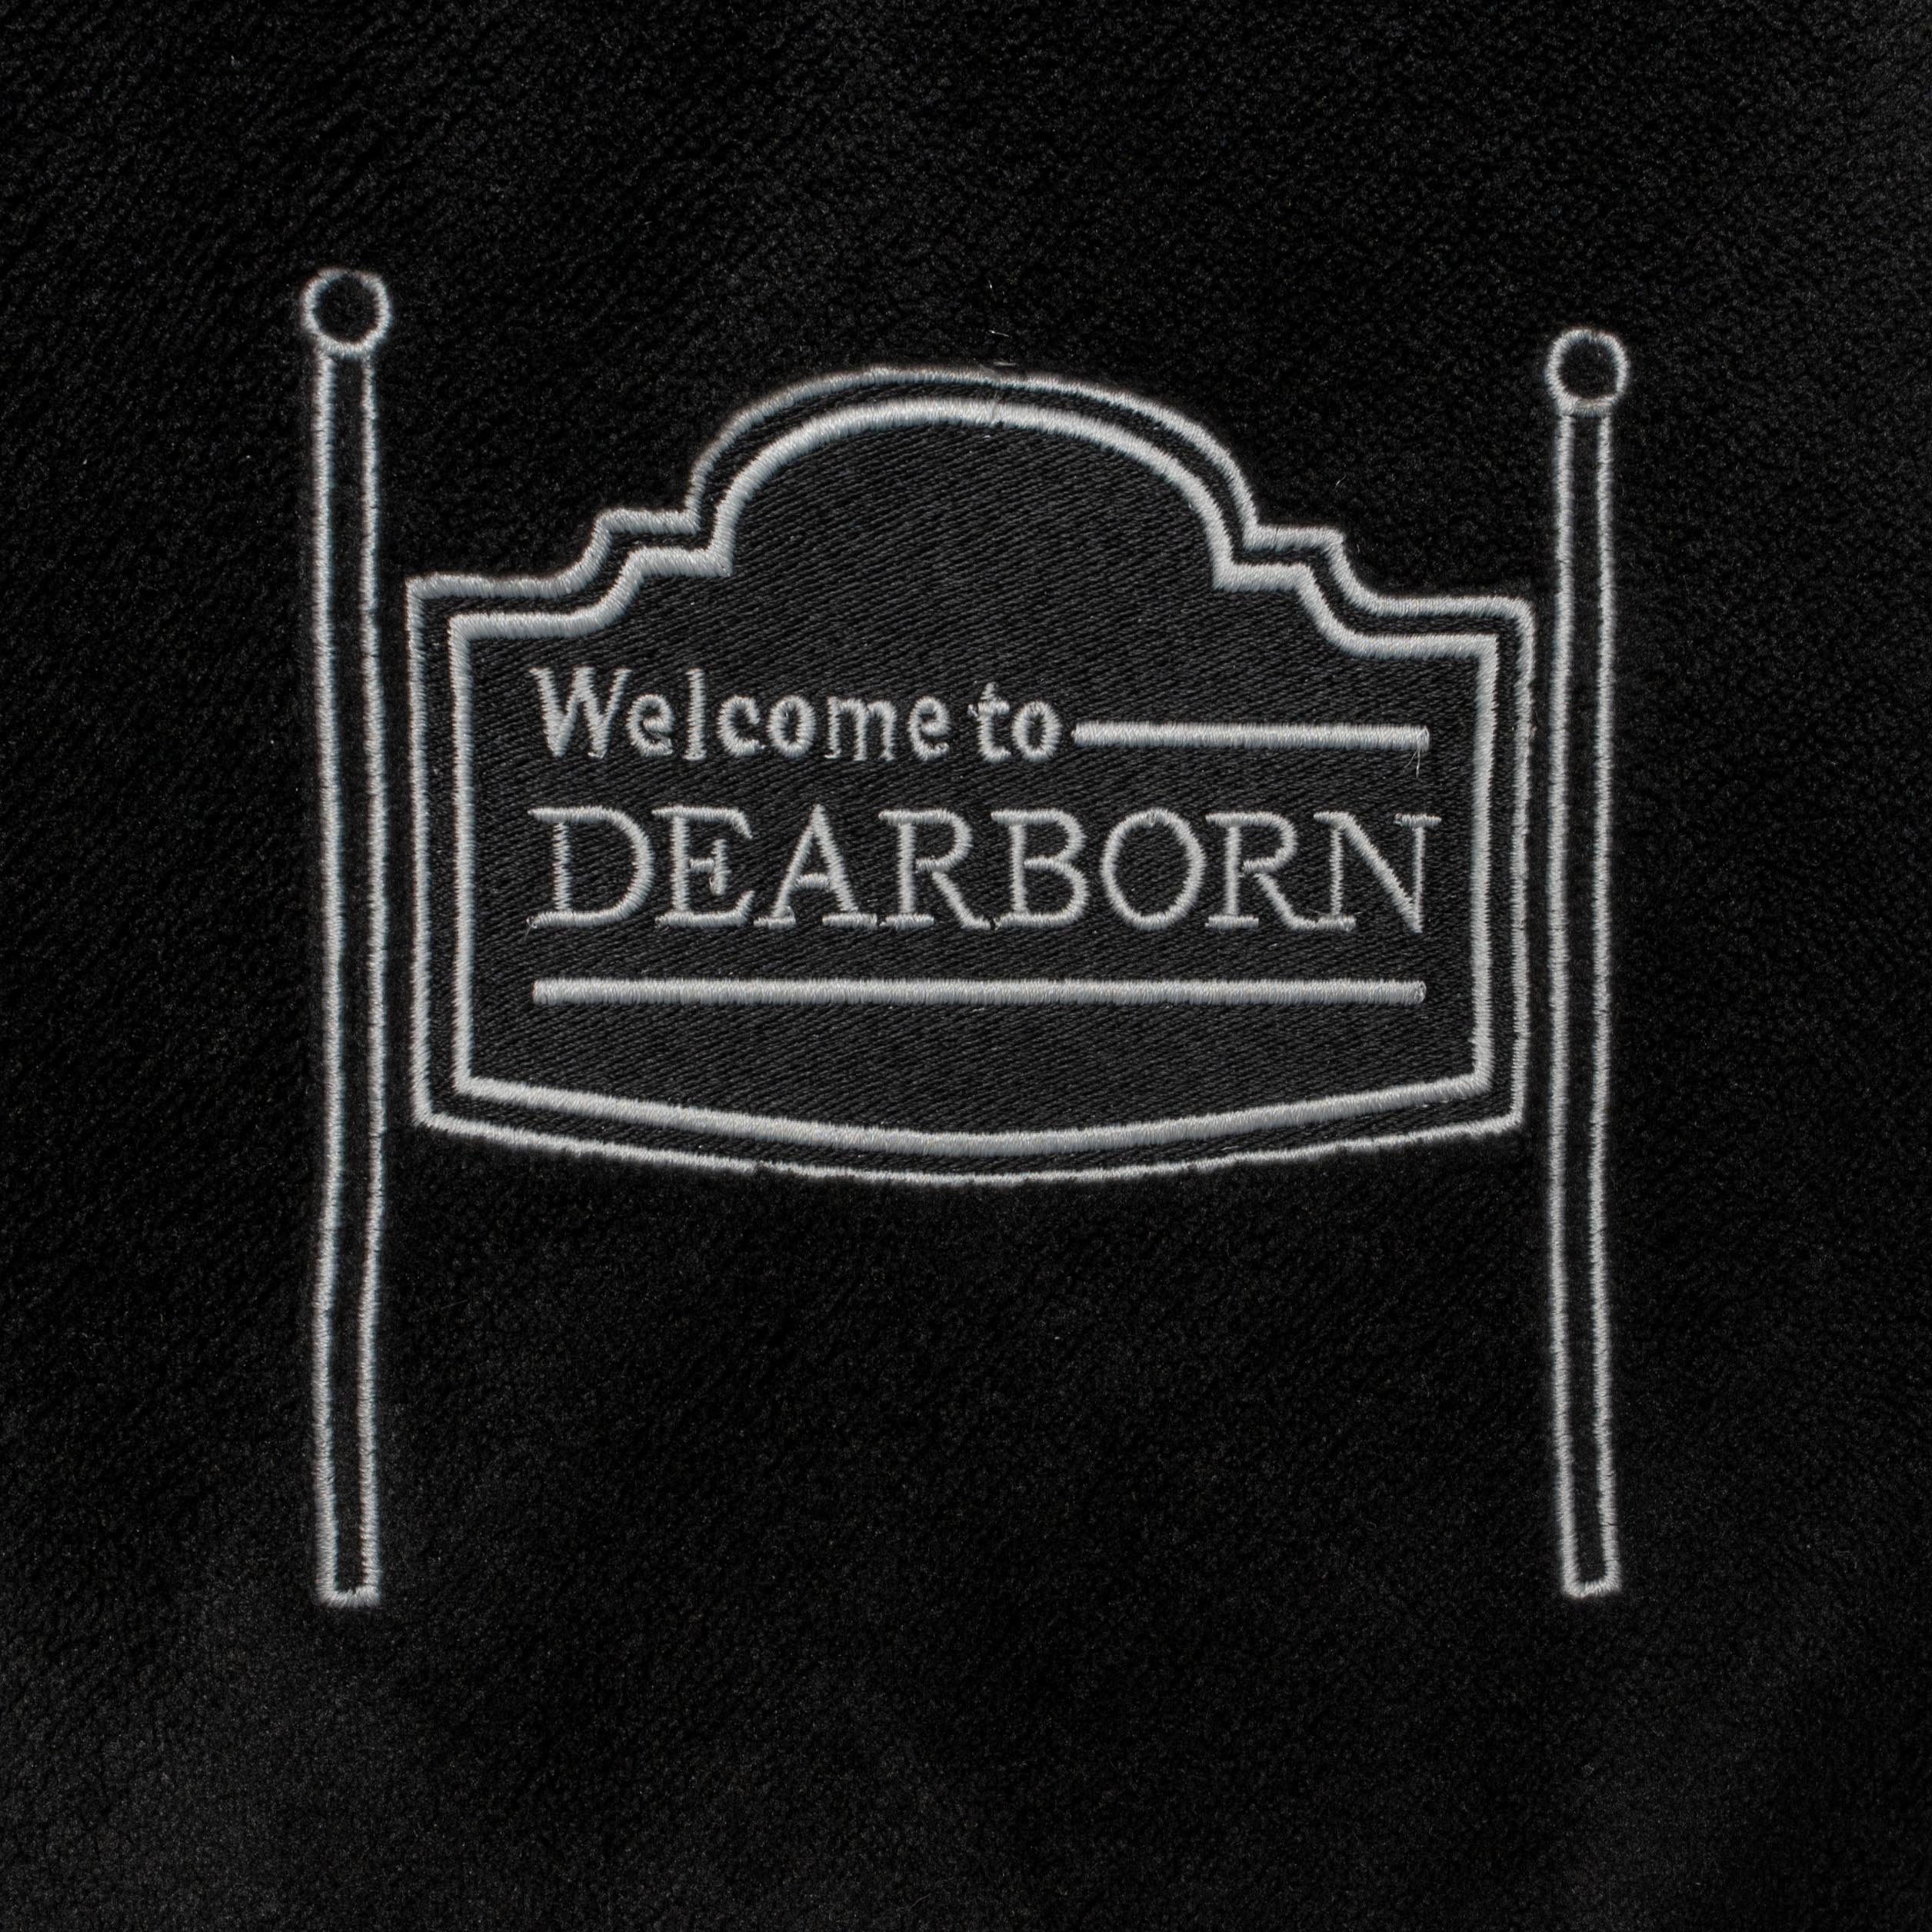 Welcome to Dearborn | Blanket